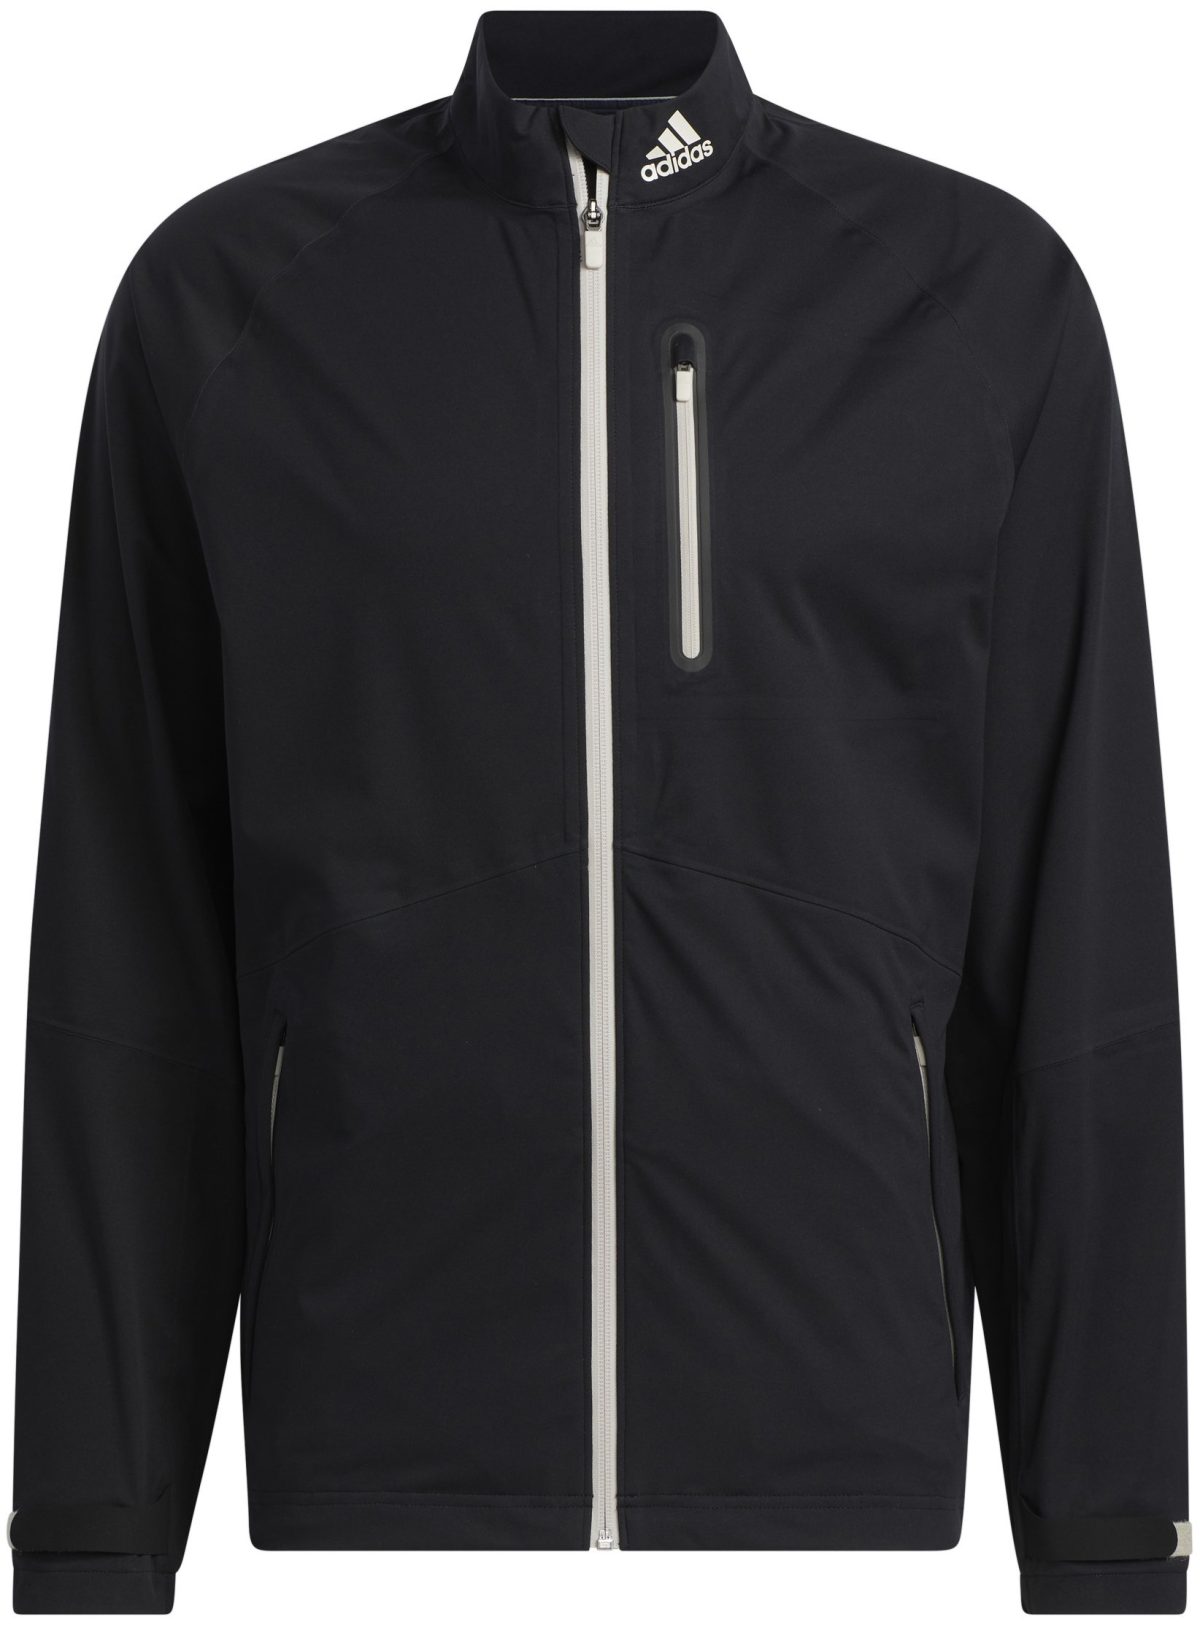 adidas Men's Rain.rdy Full-Zip Golf Rain Jacket, 100% Recycled Polyester in Black, Size S